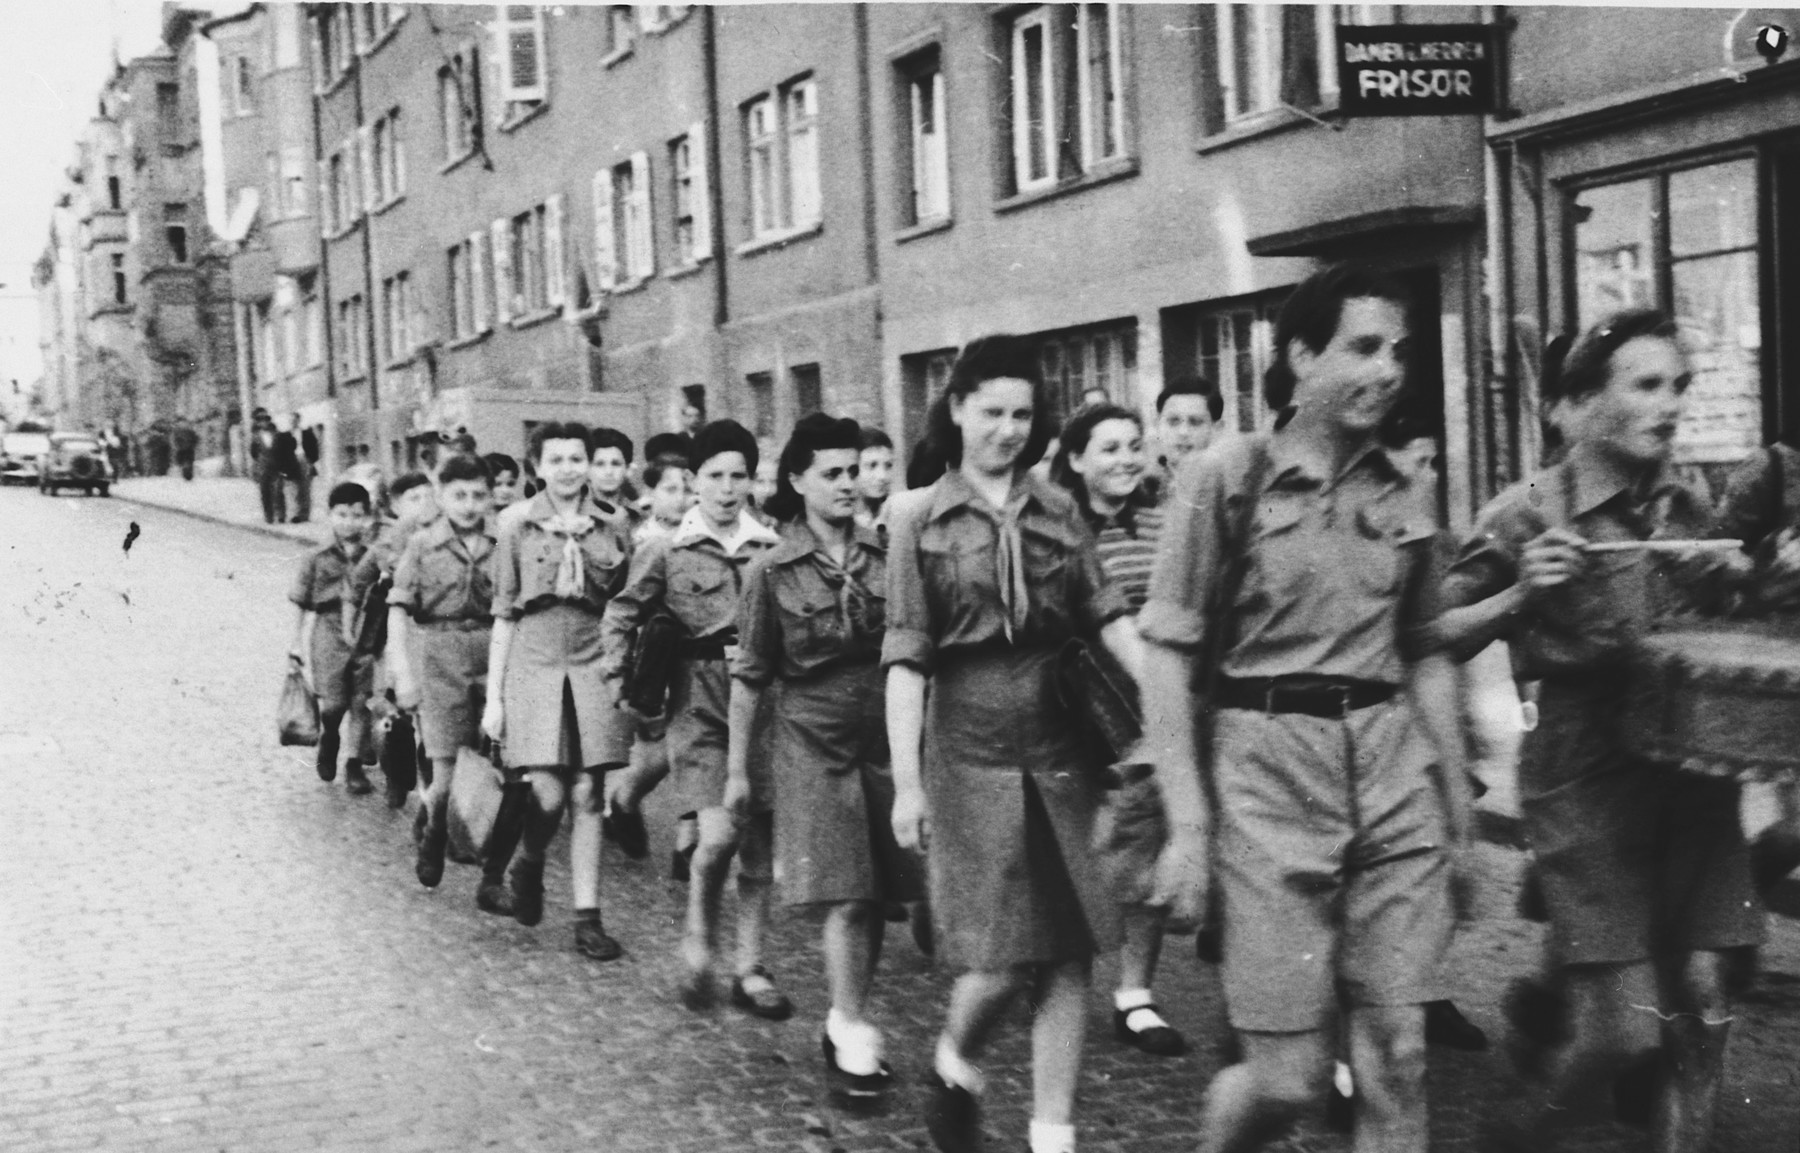 Members of Hashomer Hatzair march in a Zionist demonstration through a commercial street in Stuttgart.

Among those pictured are Basia Kac, second from the left, and Hadasa Eisenberg, fourth from the left.